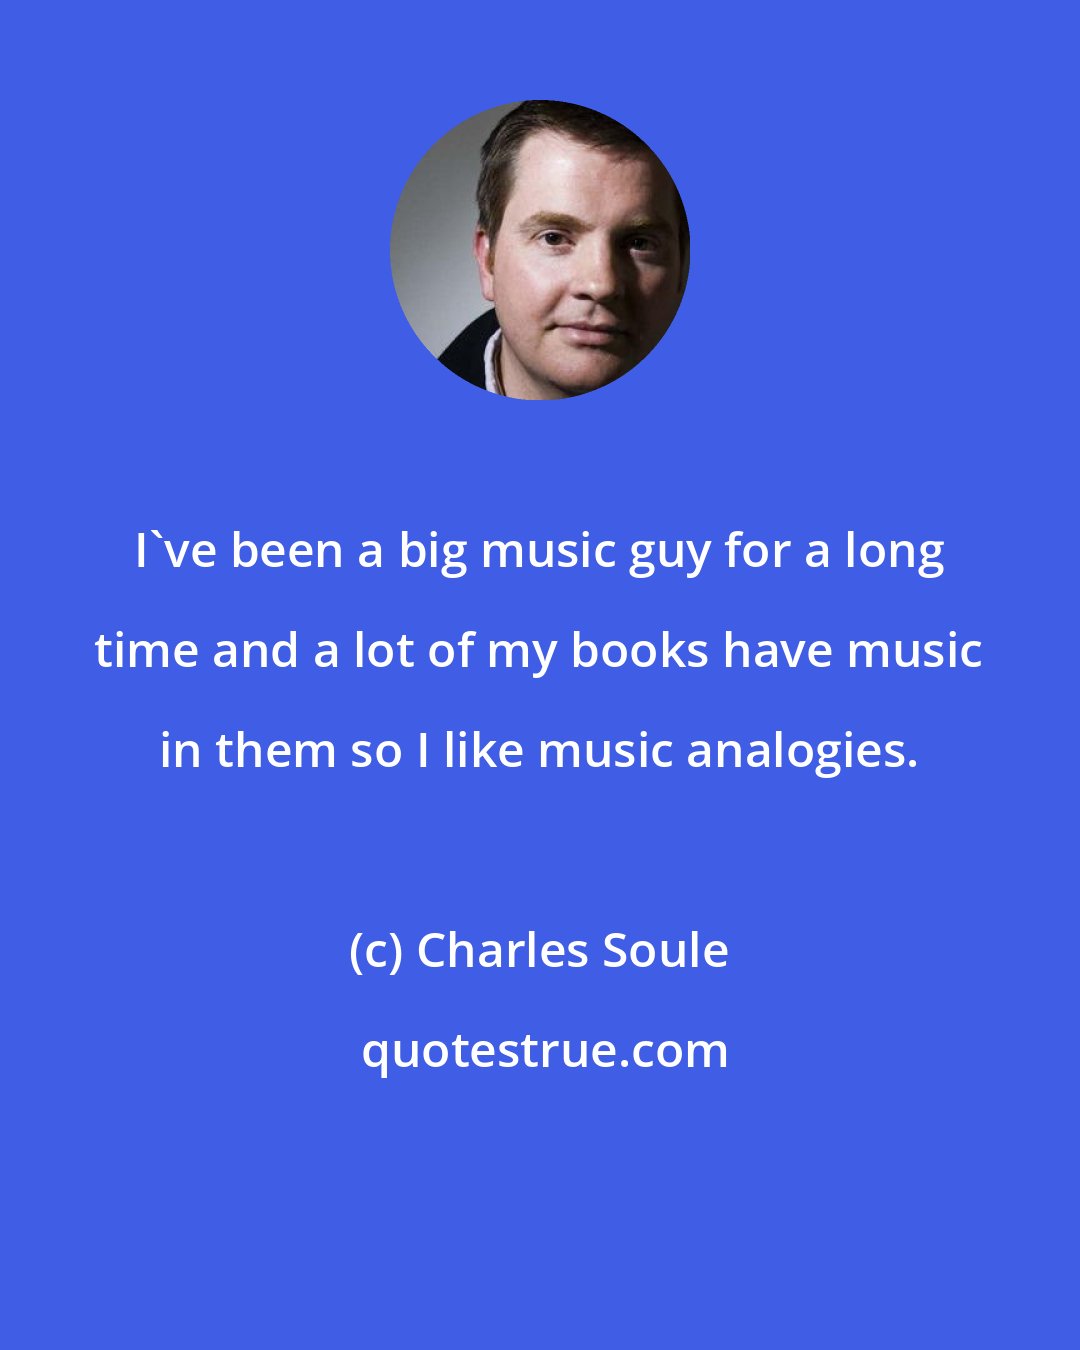 Charles Soule: I've been a big music guy for a long time and a lot of my books have music in them so I like music analogies.